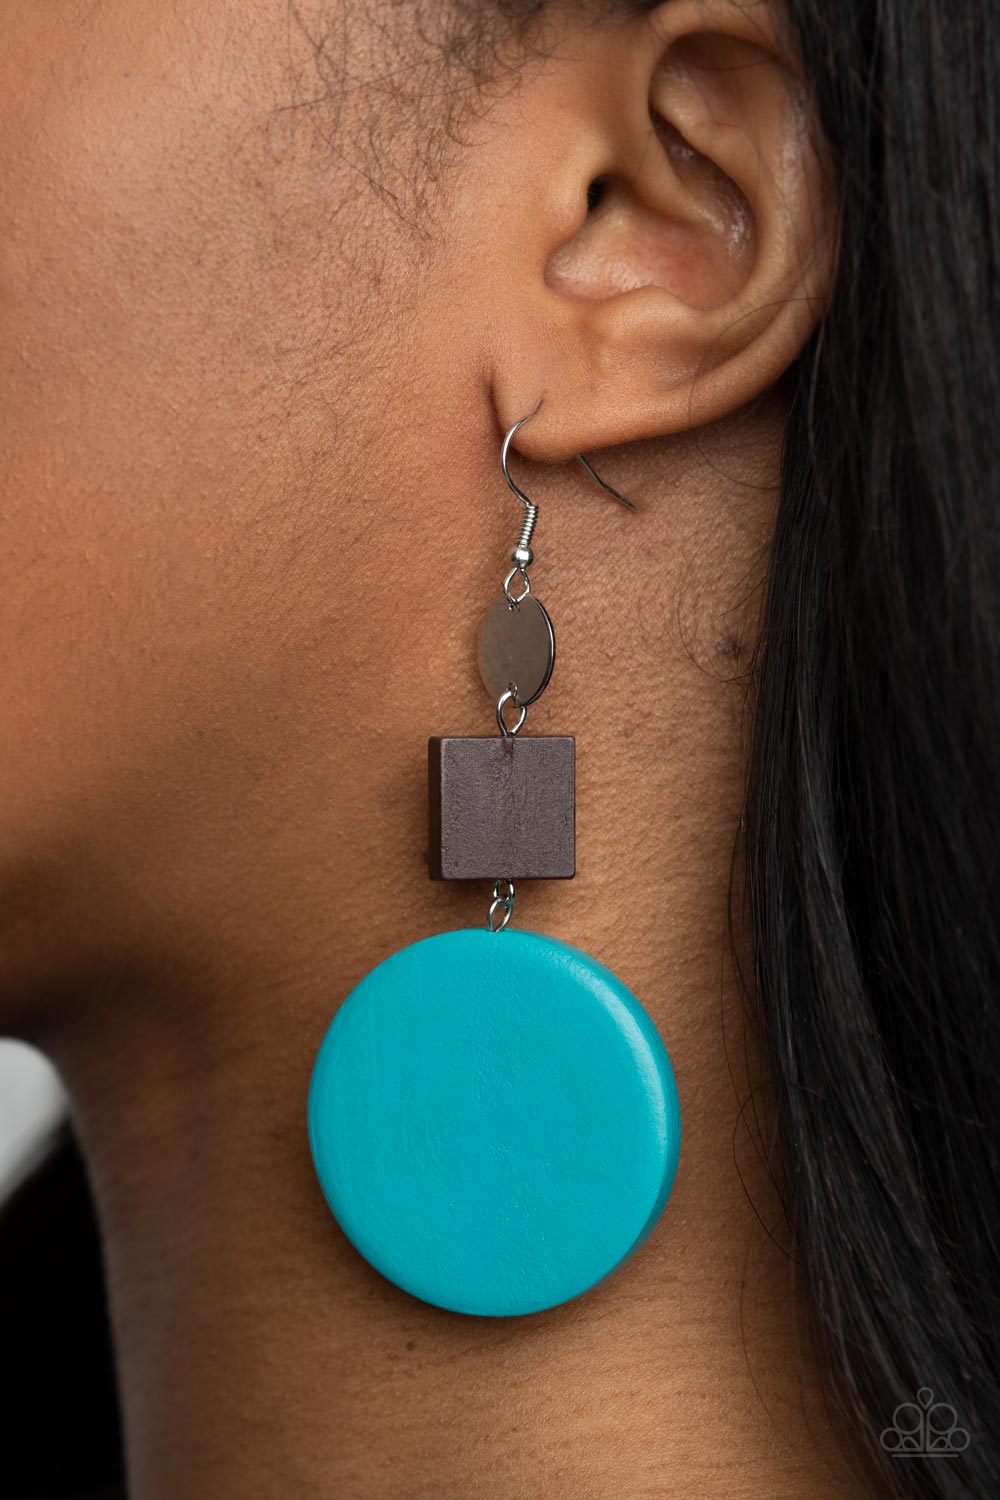 &lt;P&gt;A shiny silver disc, brown wooden square, and oversized blue wooden circle delicately link into a colorfully retro lure for a trendsetting finish. Earring attaches to a standard fishhook fitting. &lt;/P&gt;  

&lt;P&gt; &lt;I&gt;  Sold as one pair of earrings. &lt;/I&gt;  &lt;/P&gt;


&lt;img src=\&quot;https://d9b54x484lq62.cloudfront.net/paparazzi/shopping/images/517_tag150x115_1.png\&quot; alt=\&quot;New Kit\&quot; align=\&quot;middle\&quot; height=\&quot;50\&quot; width=\&quot;50\&quot;/&gt;